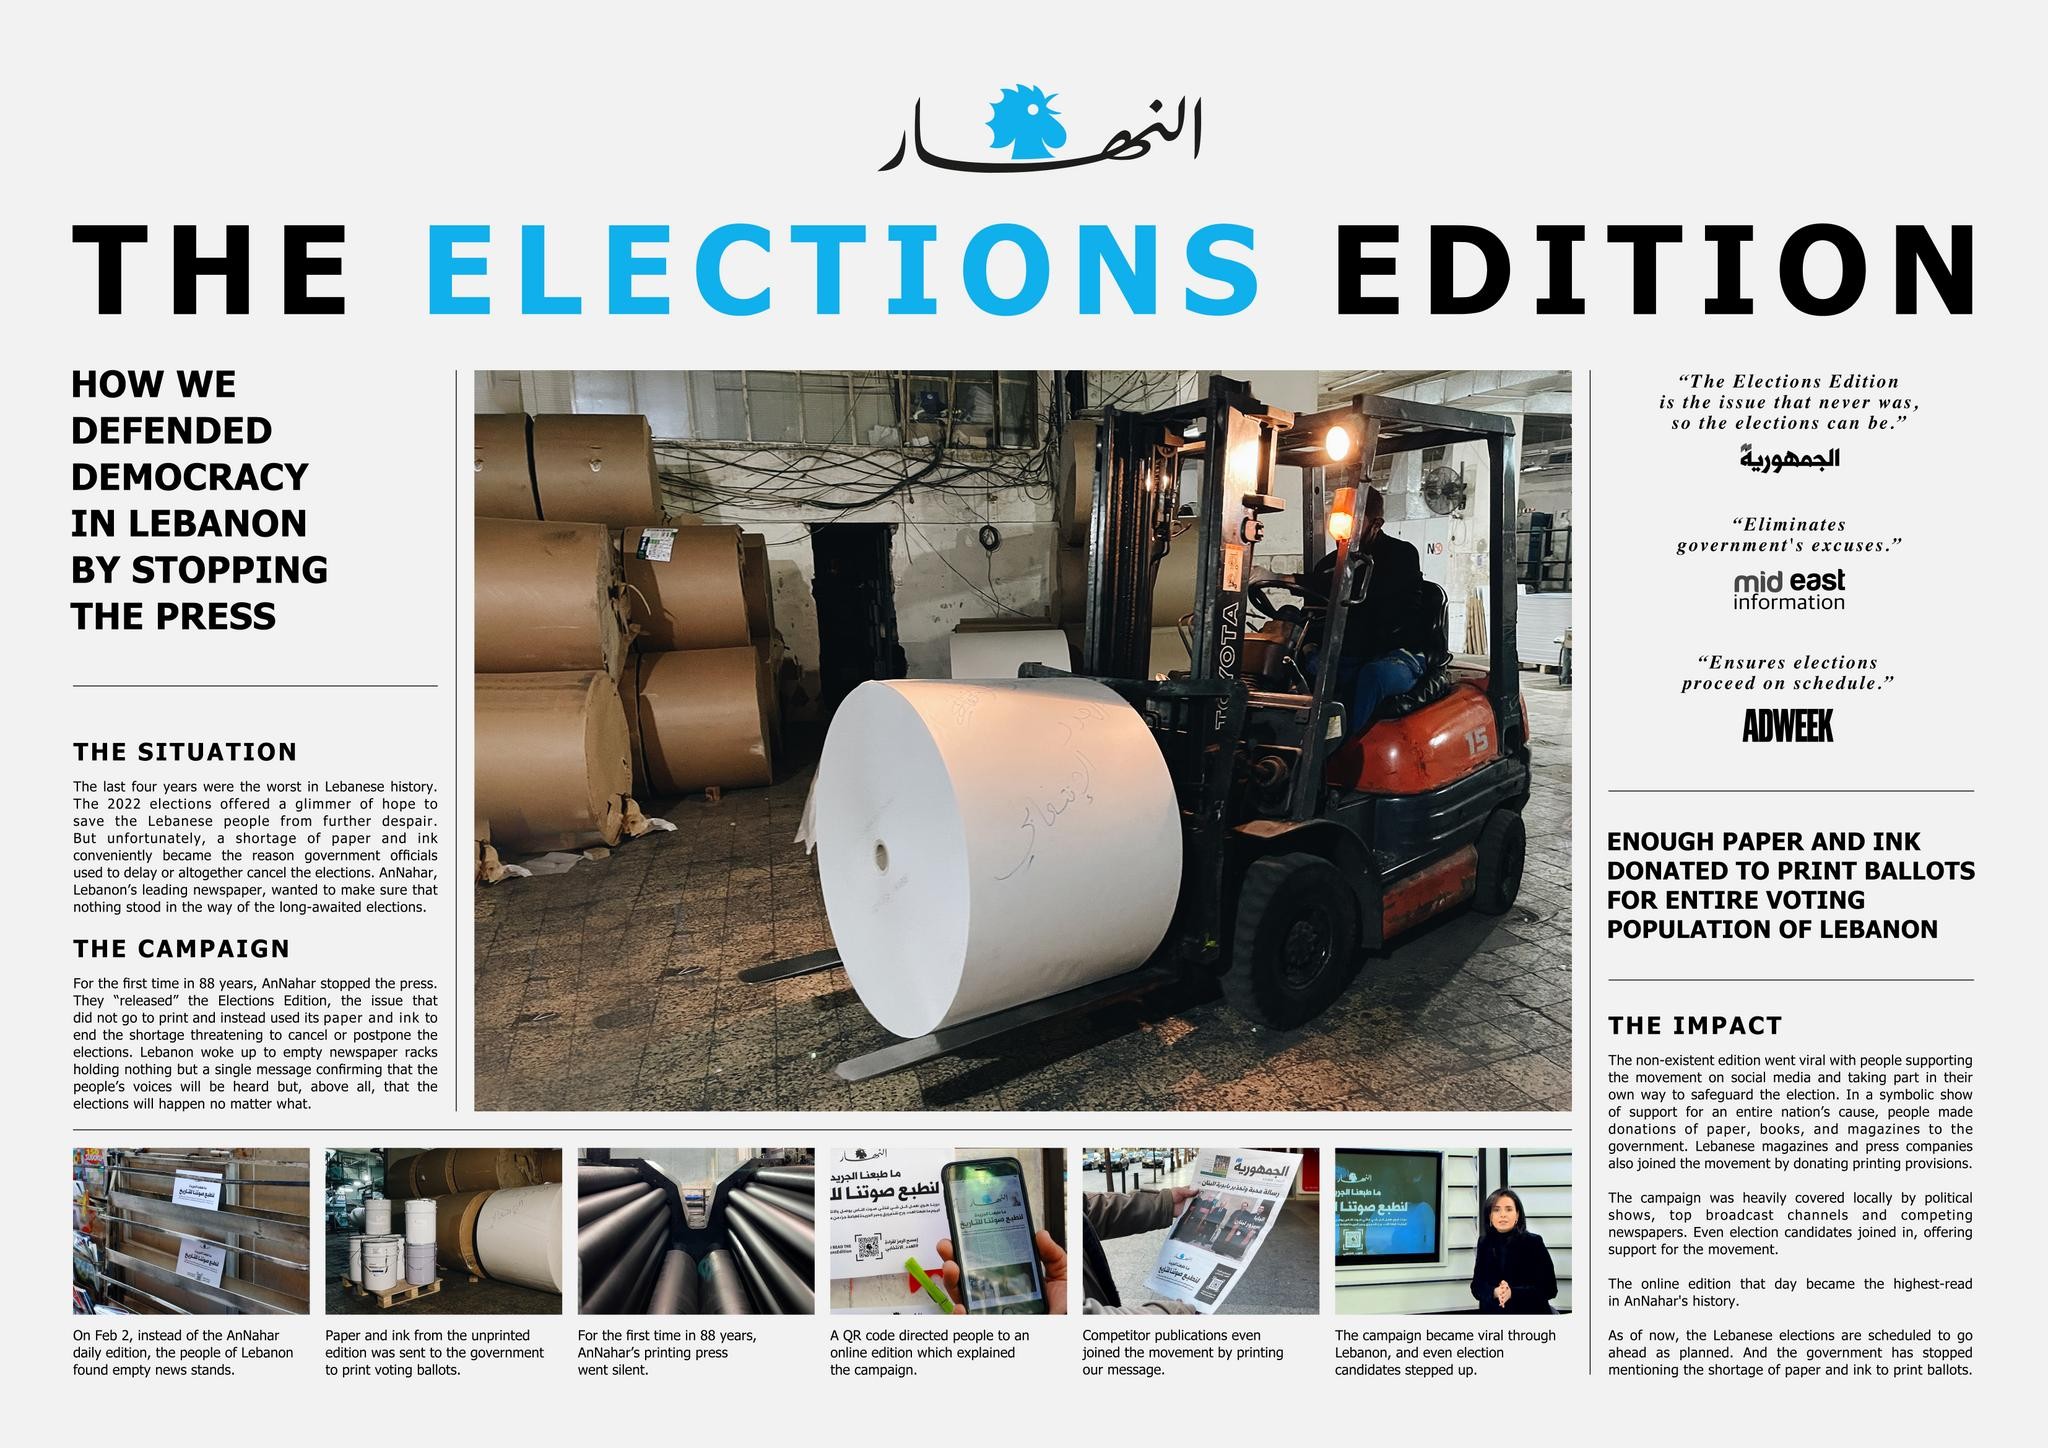 THE ELECTIONS EDITION